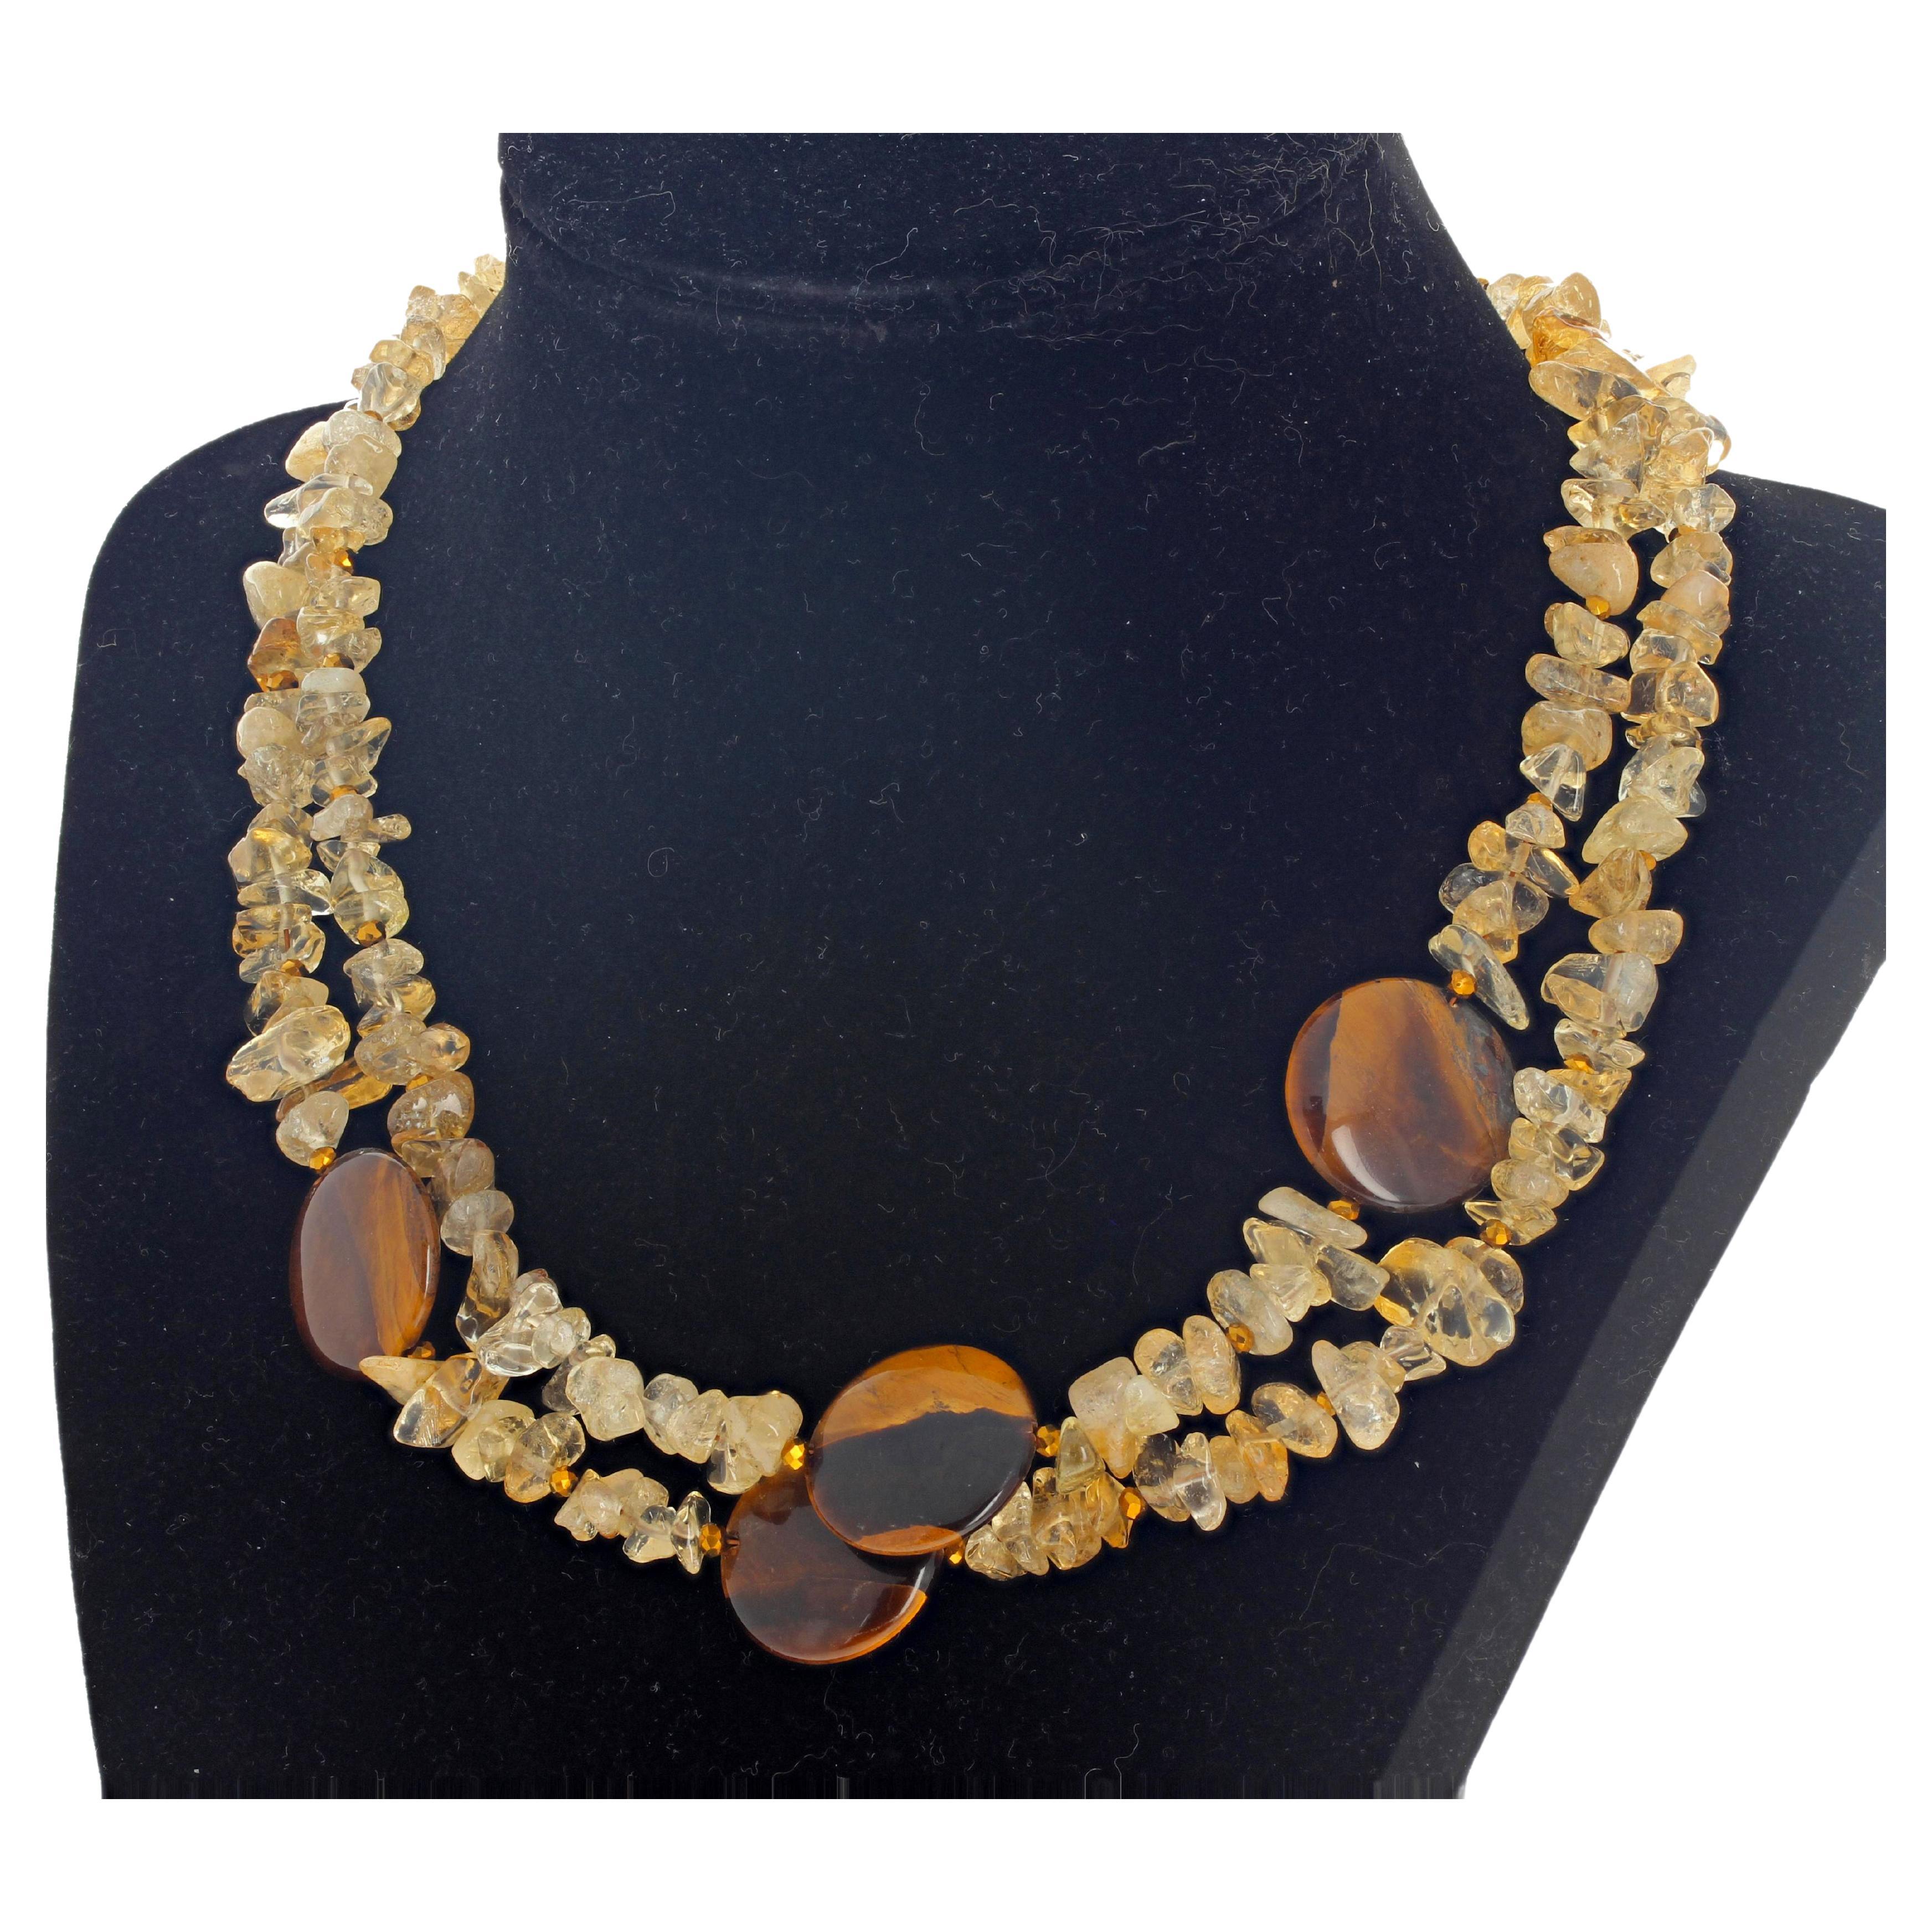 This double strand necklace is composed of highly polished chips and chunks of natural Citrine gemstones enhanced with unevenly placed highly polished real Tiger Eye 